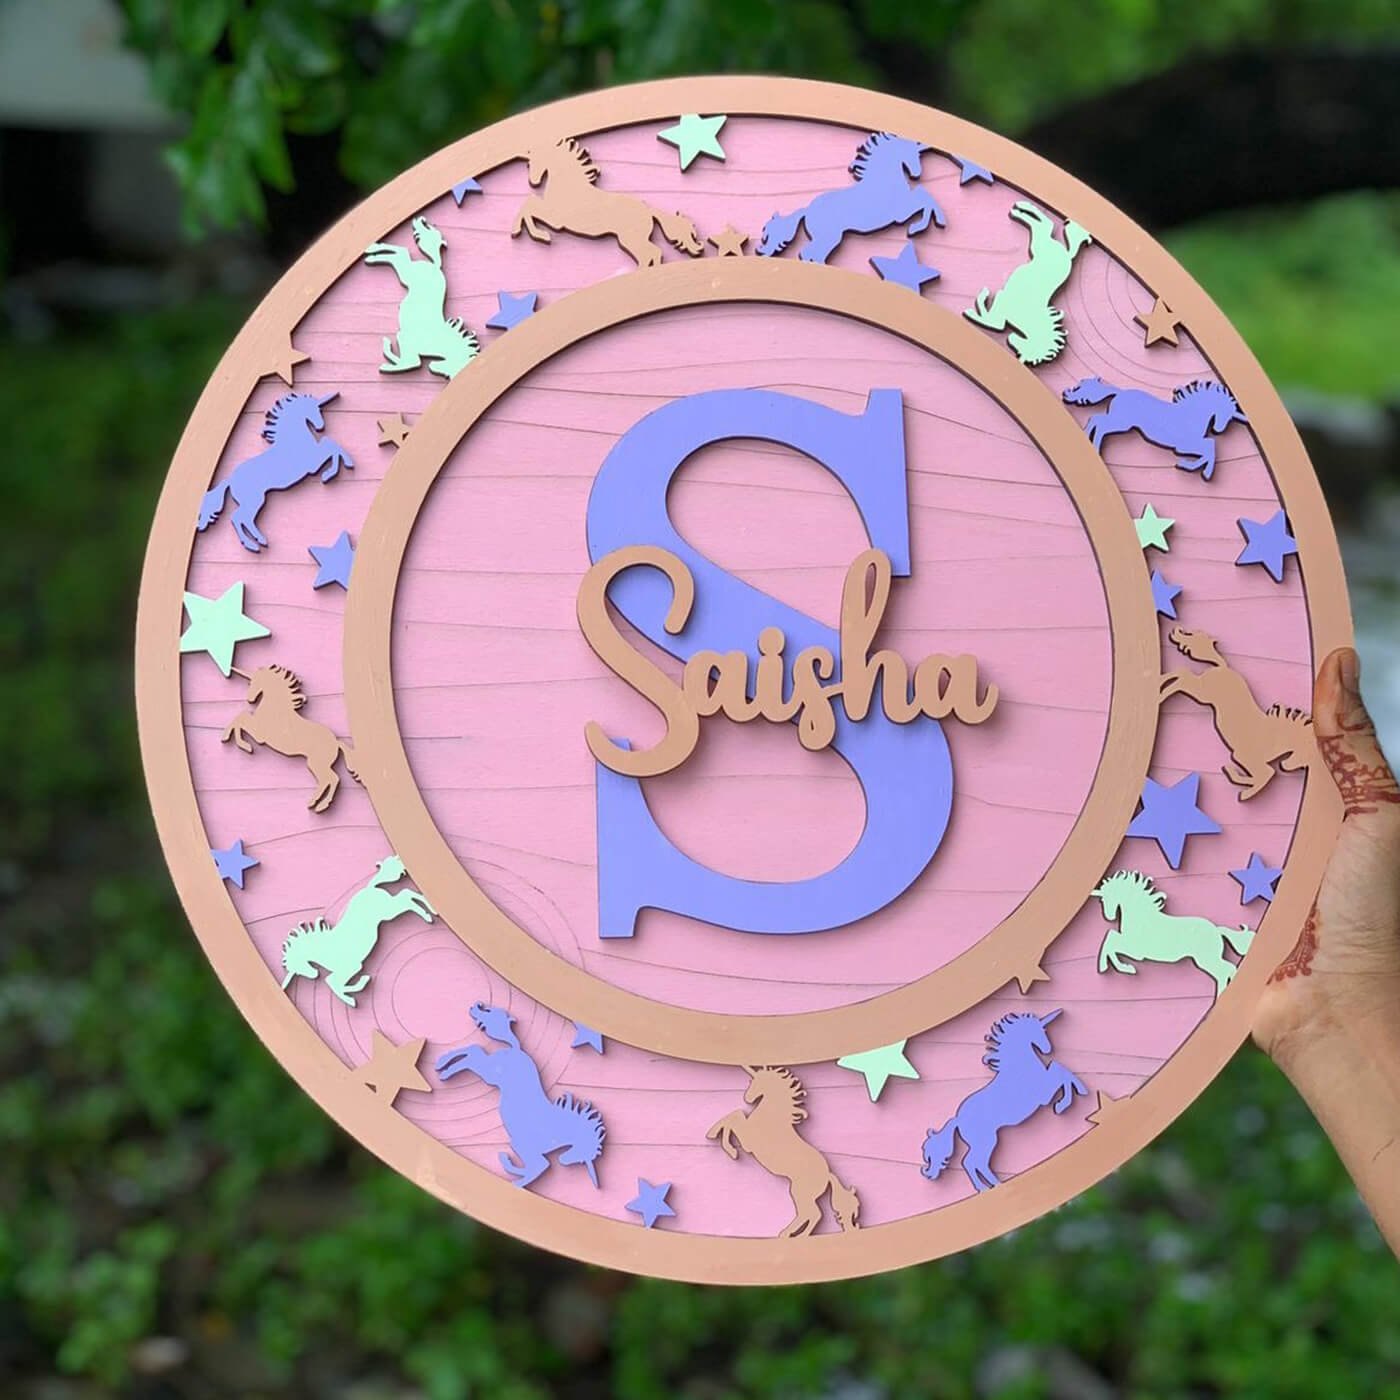 Painted Nameboard for Kids - Initial + Name  with Unicorn Border